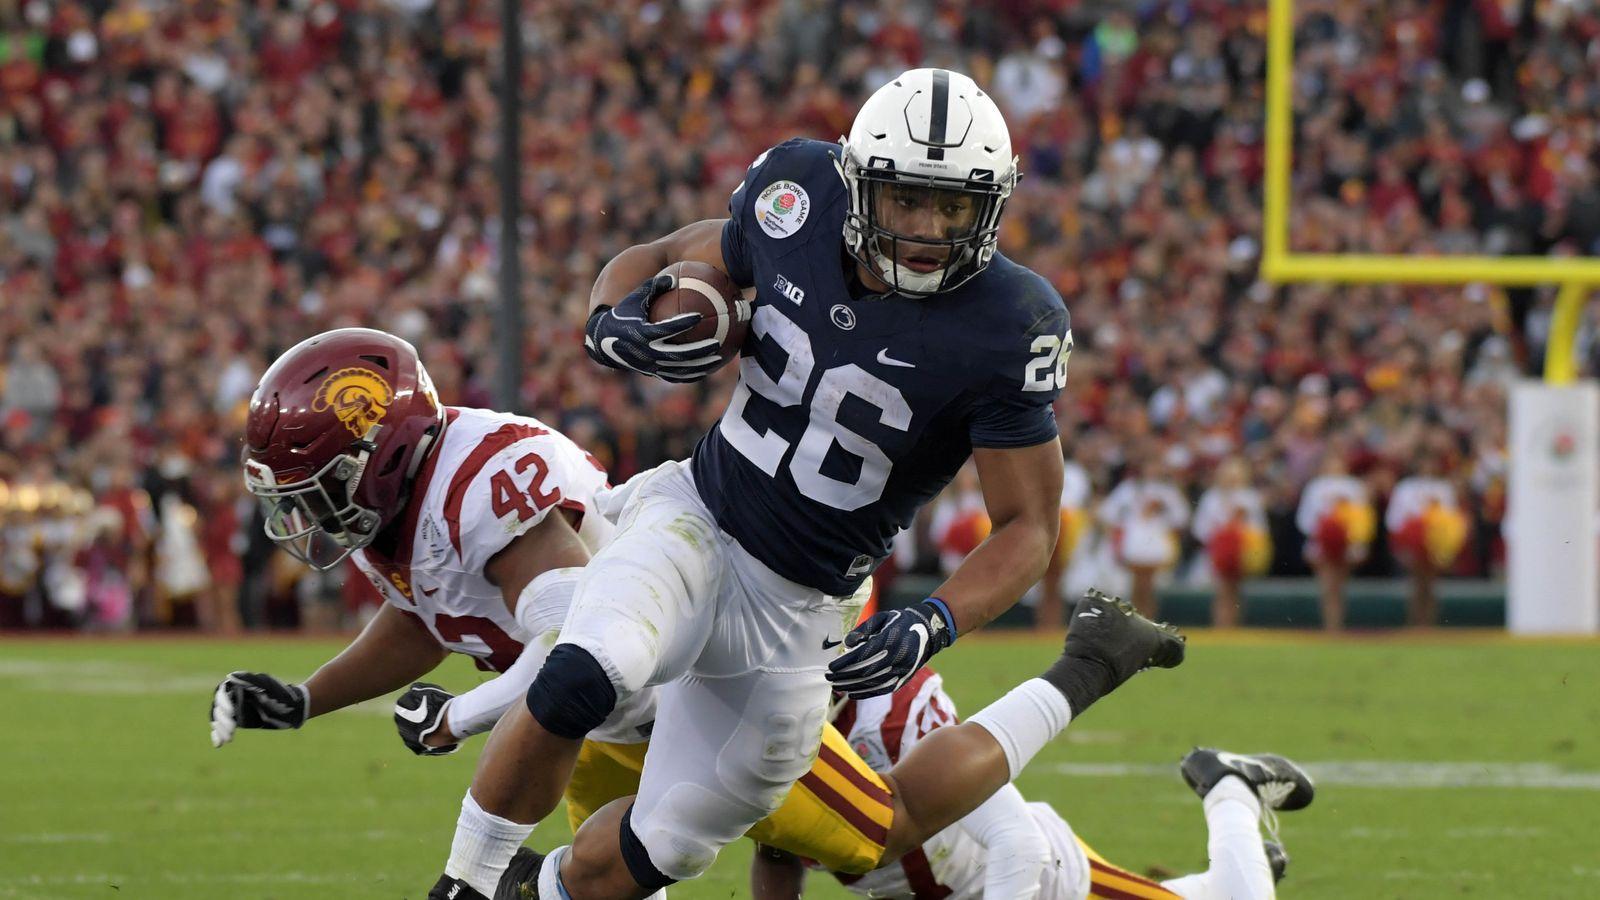 Just How Strong is Saquon Barkley? Very. Shoe Diaries